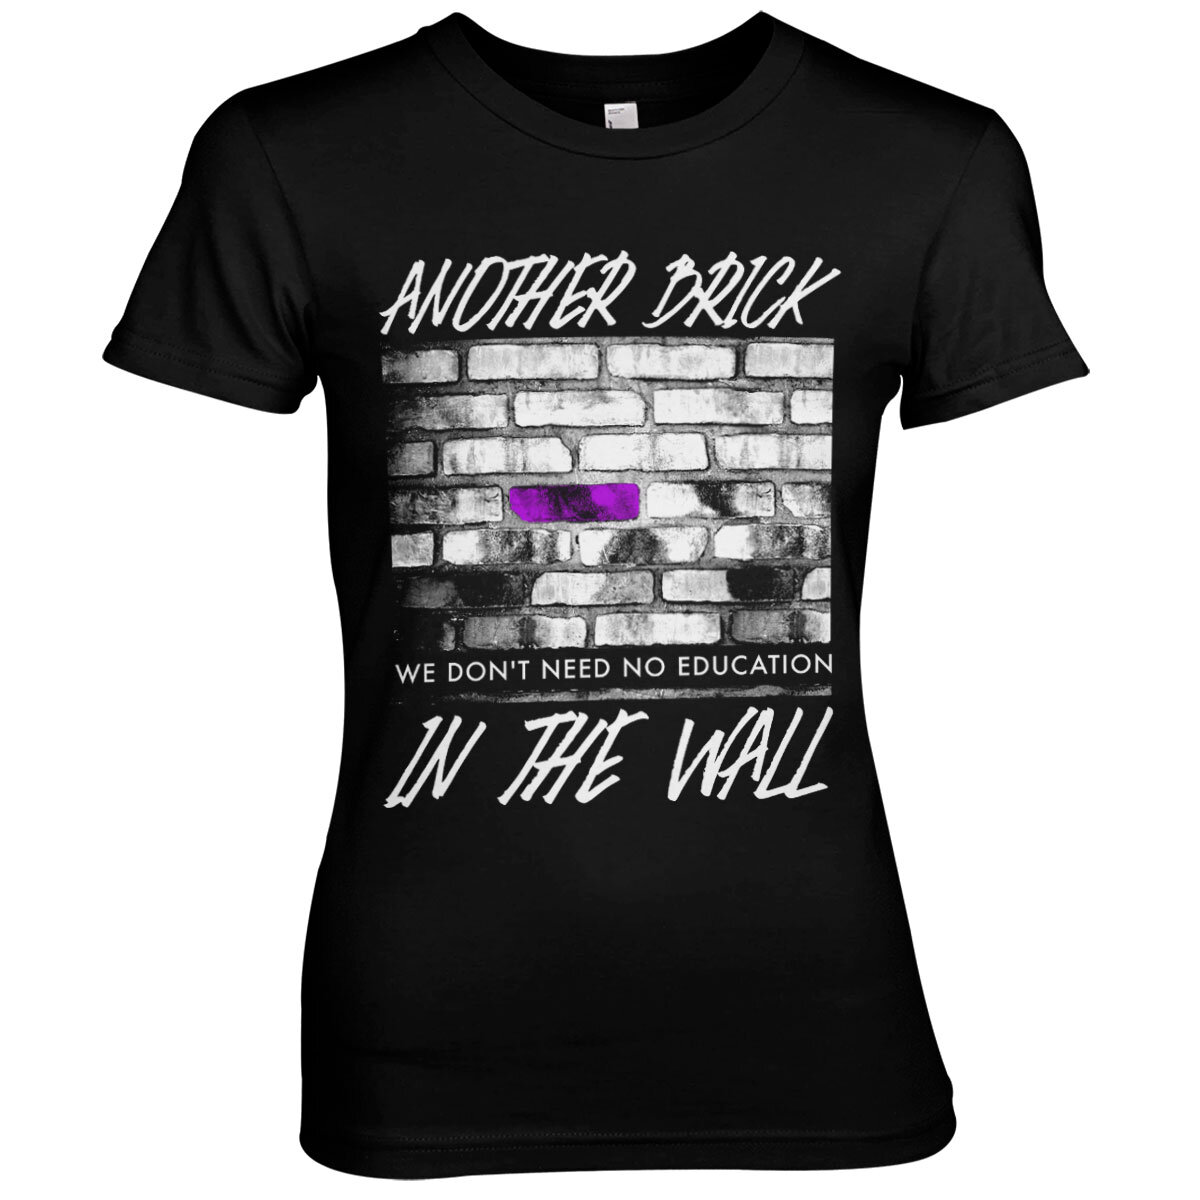 Another Brick In The Wall Girly Tee